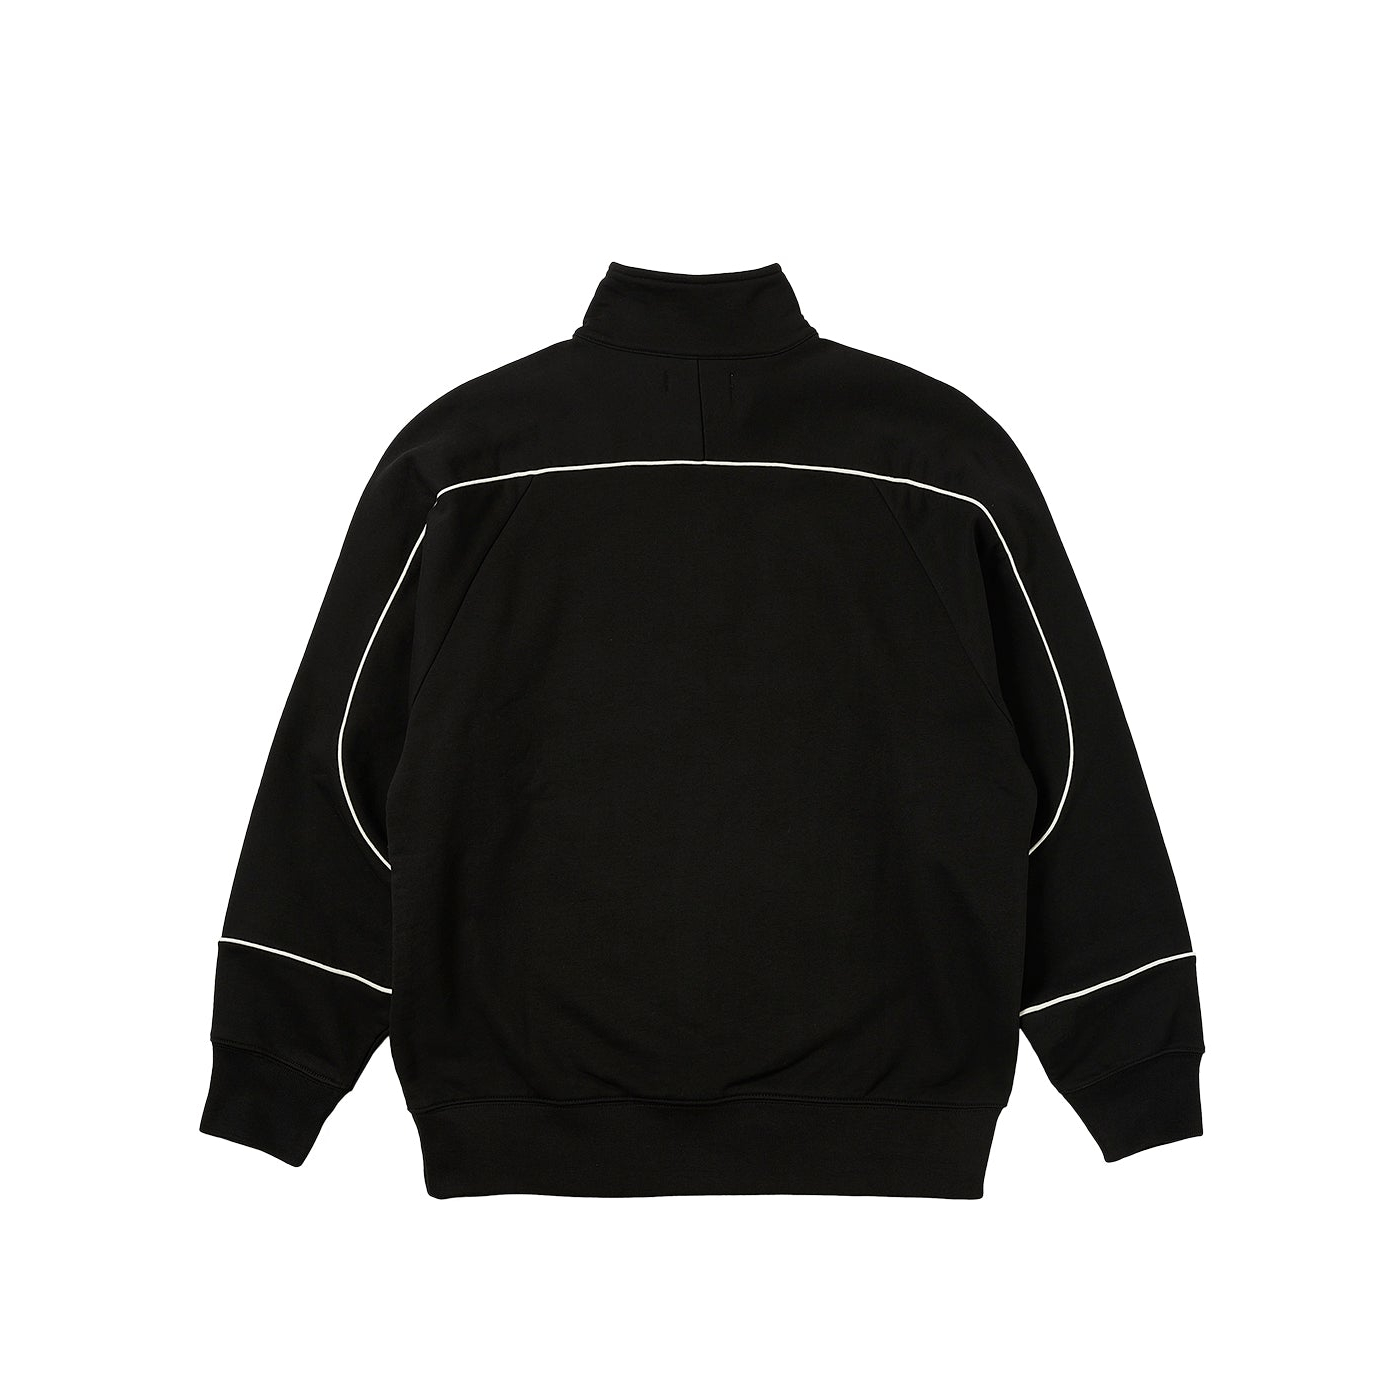 Thumbnail SPORT PIPED 1/4 ZIP BLACK one color